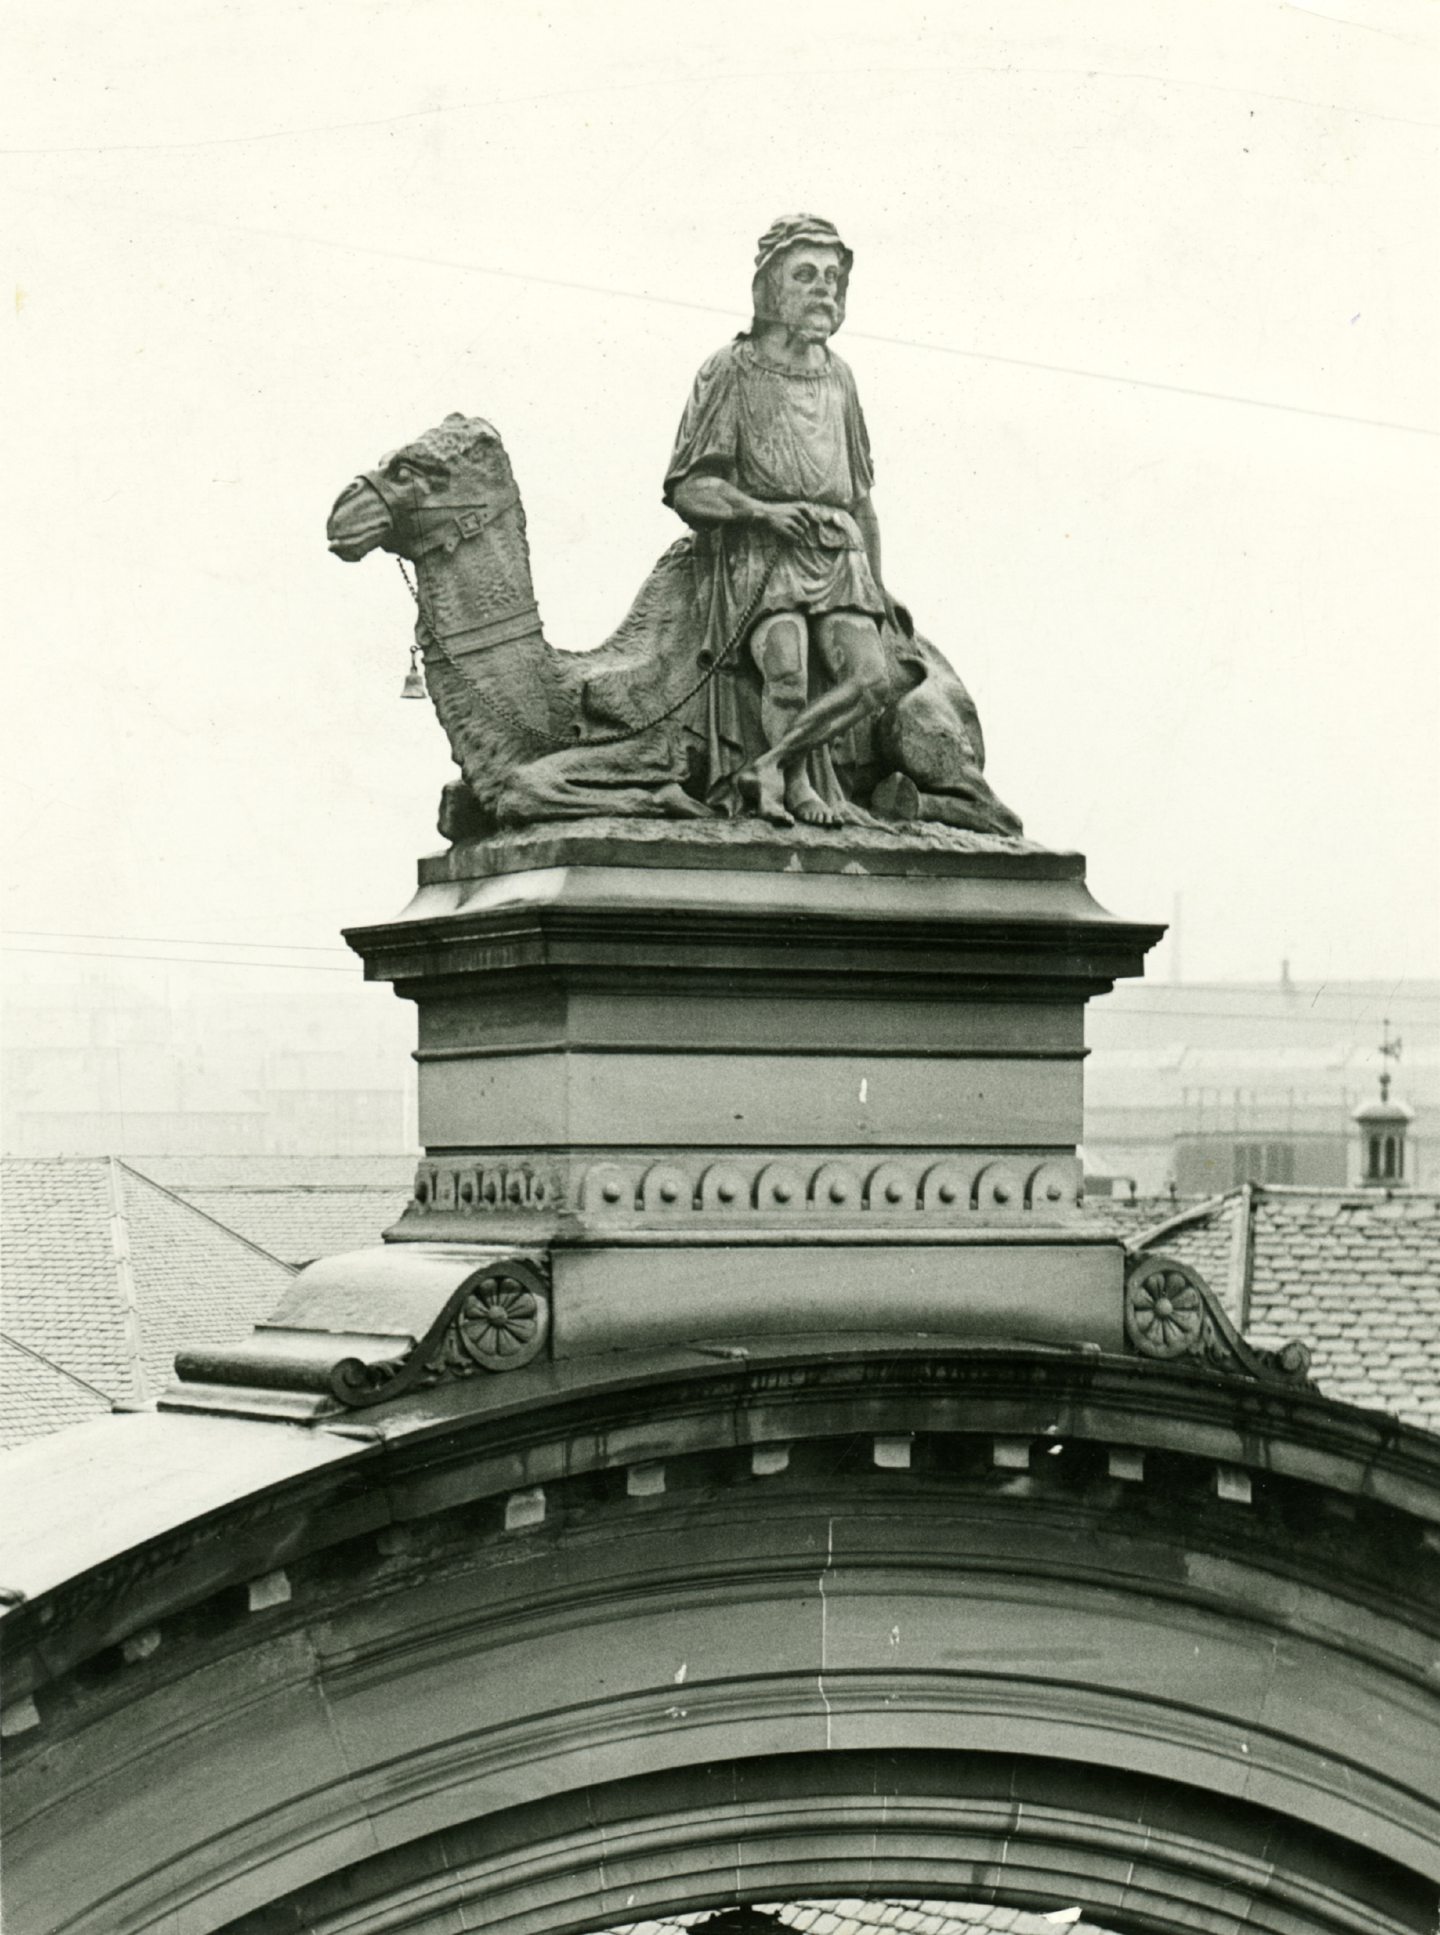 The camel above the old gateway of Bowbridge Works was buried after being dismantled during improvement work.